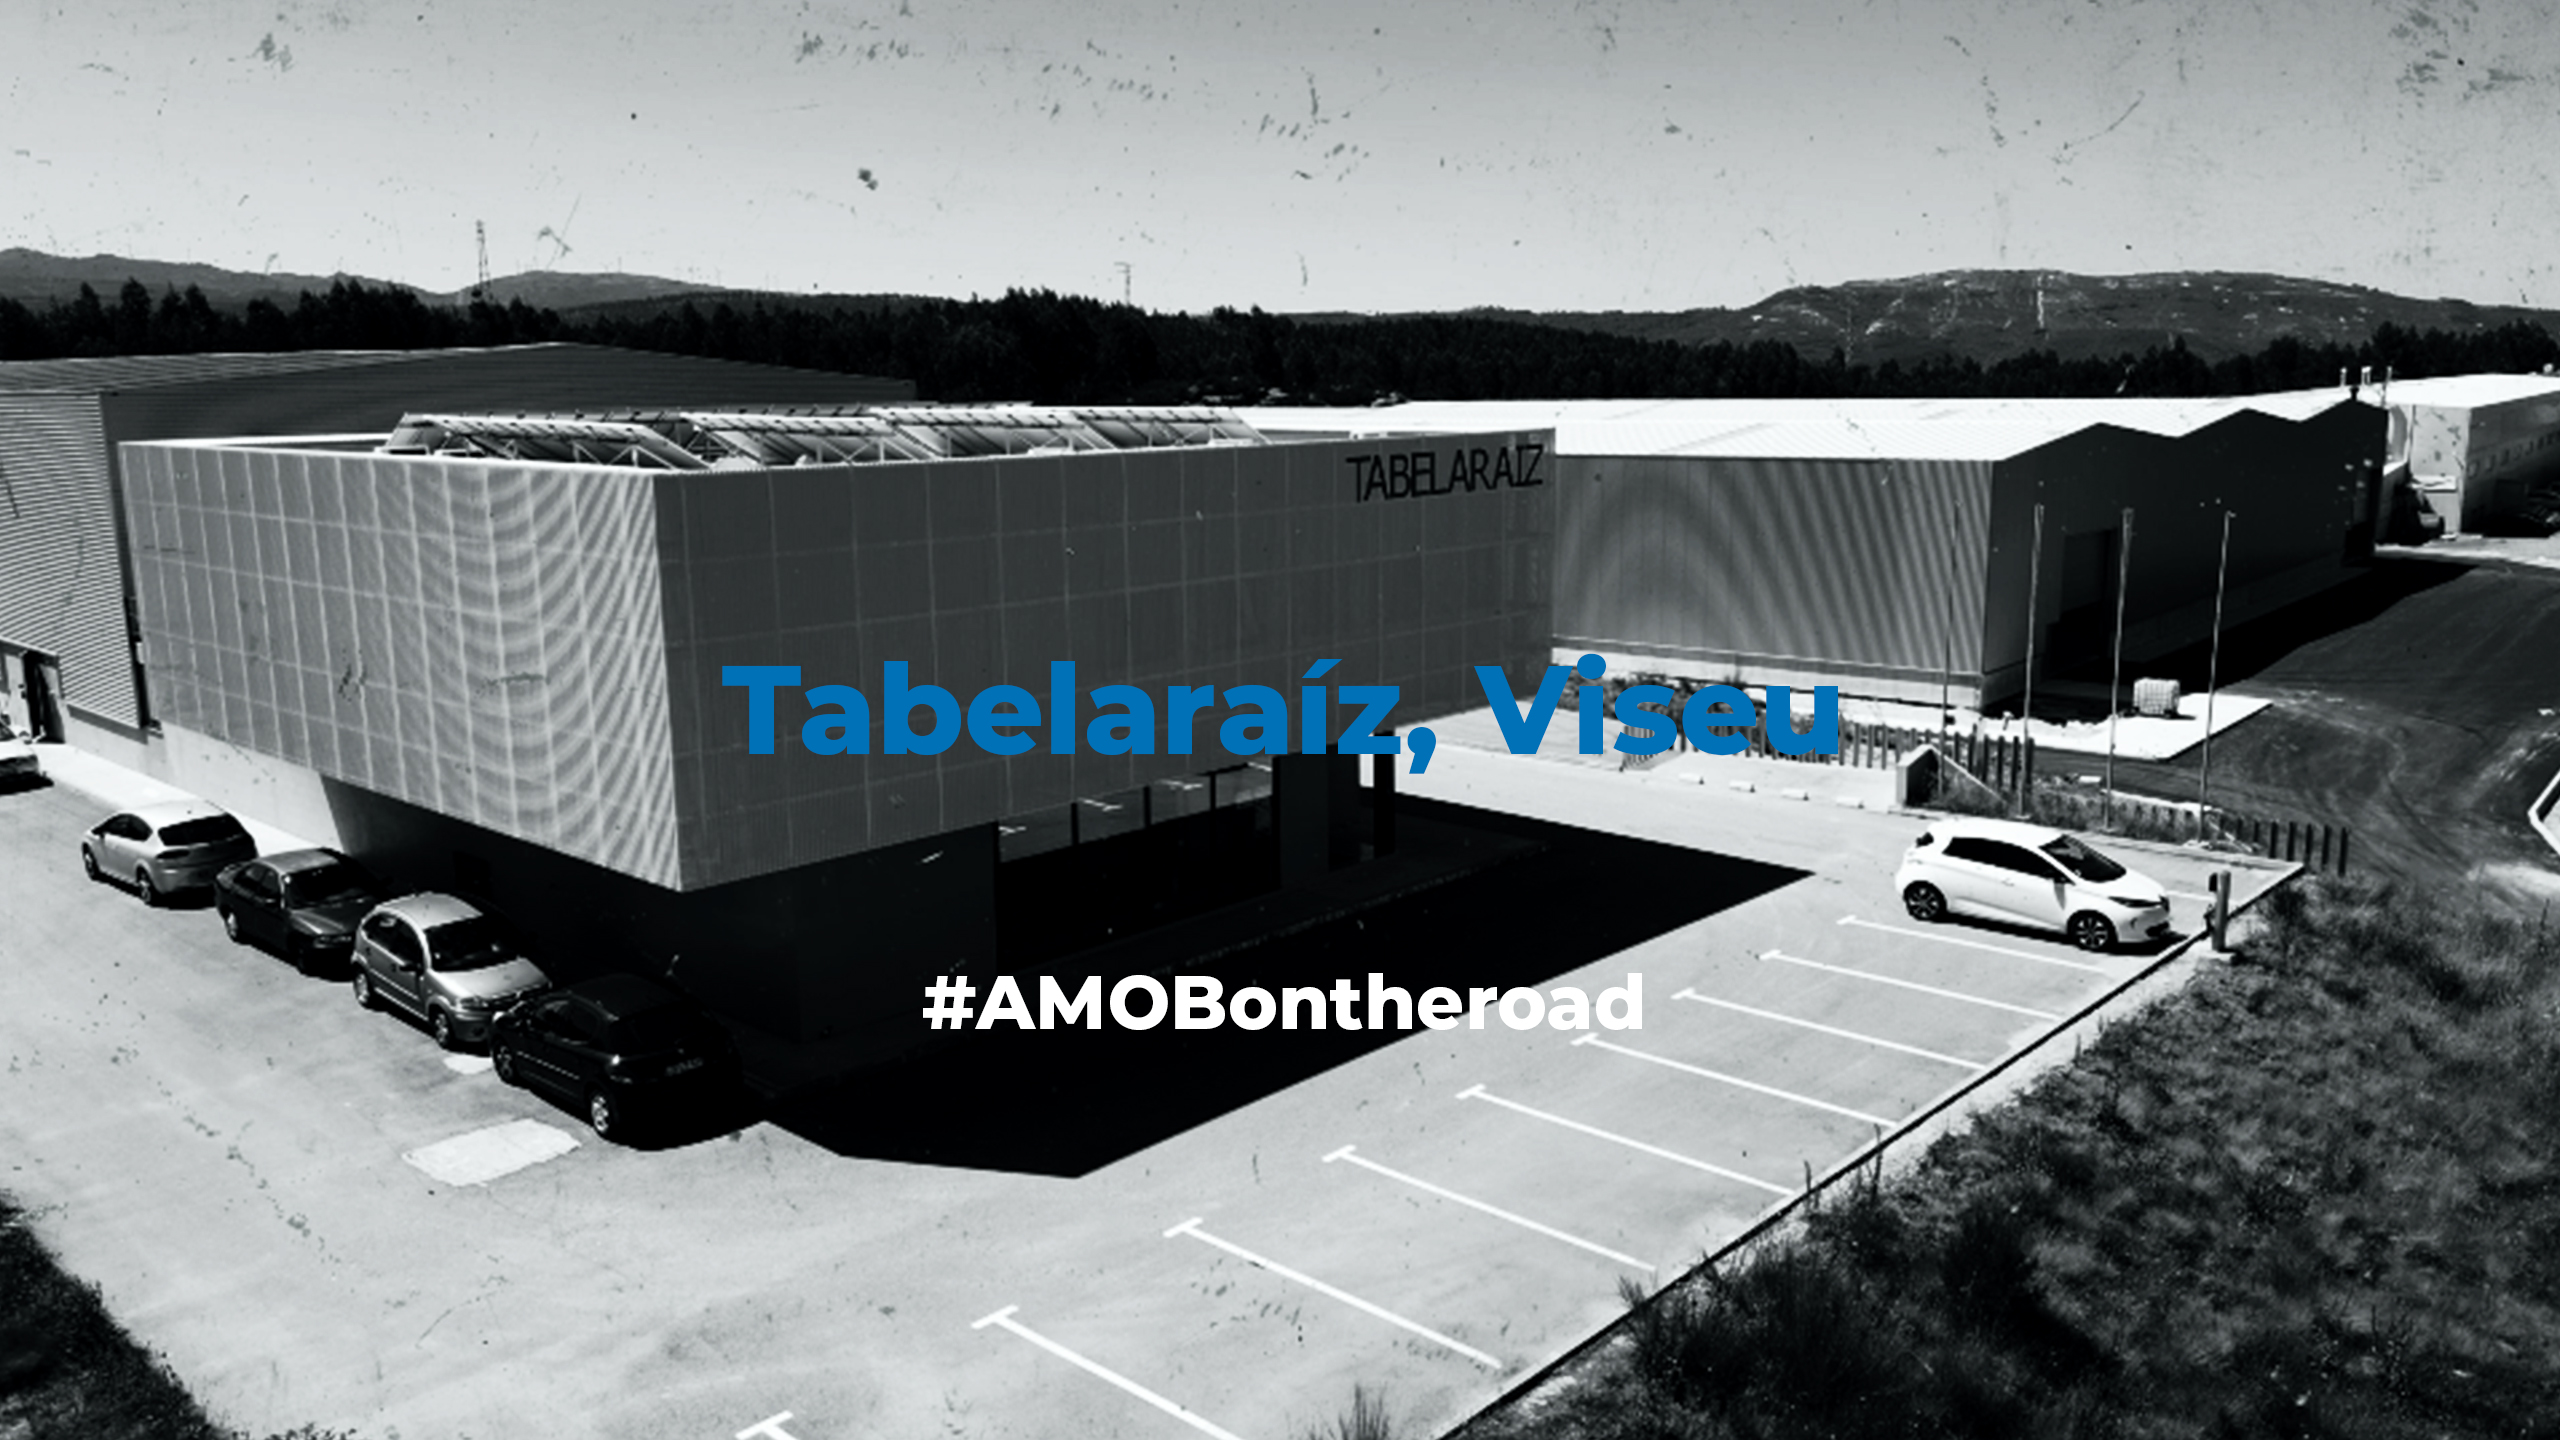 Based in Viseu, Tabelaraíz strengthens its productivity with a new AMOB roll forming line.